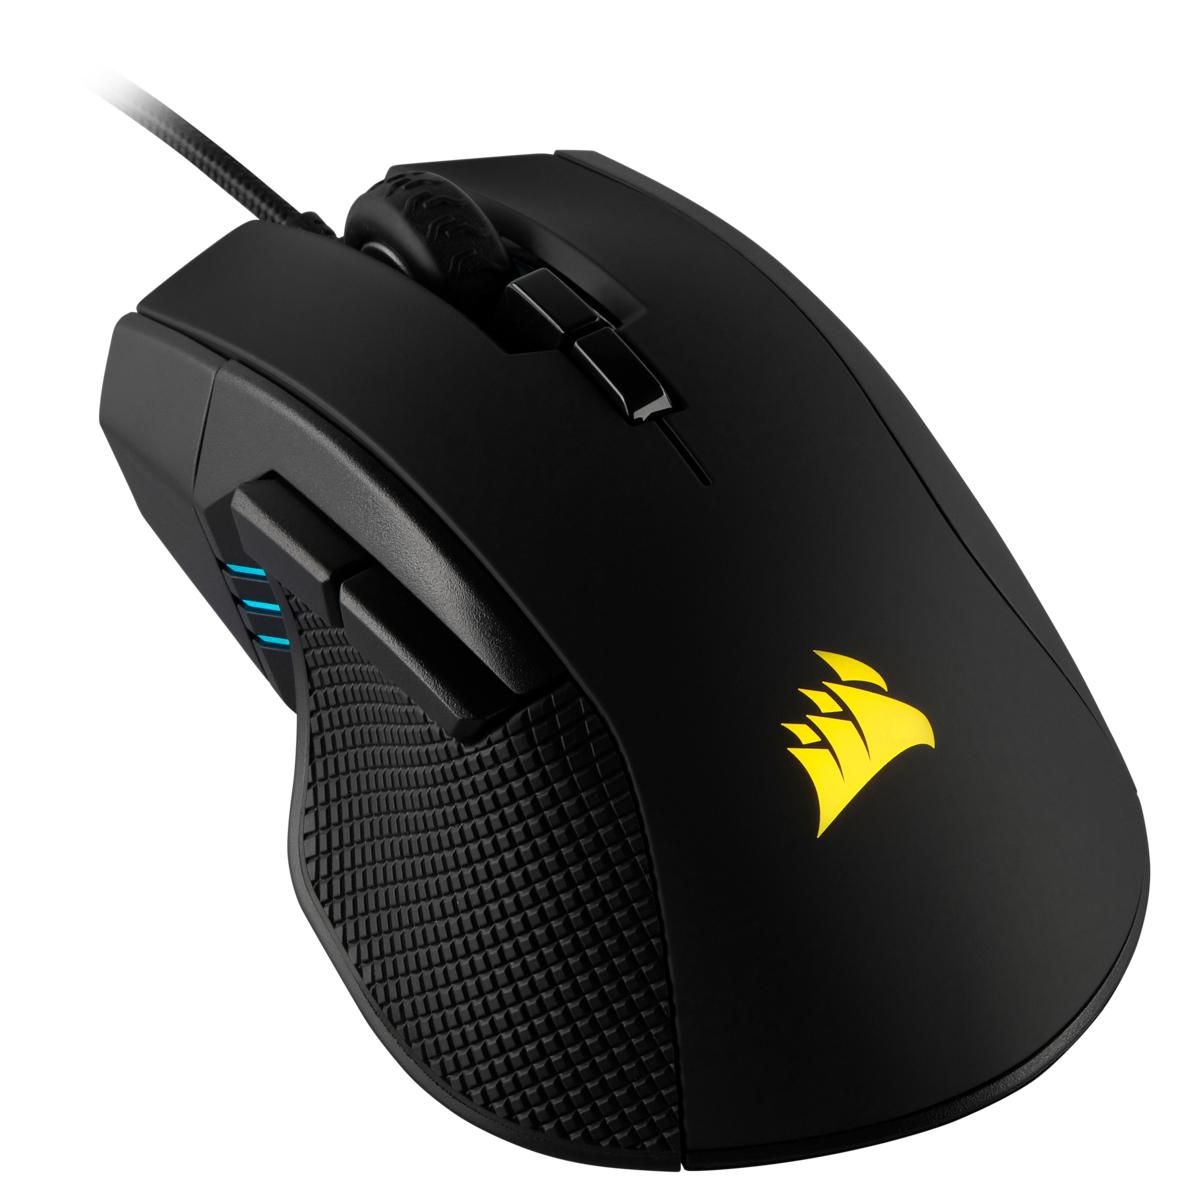 Corsair CH-9307011-EU W128298648 Ironclaw Rgb Mouse Right-Hand 